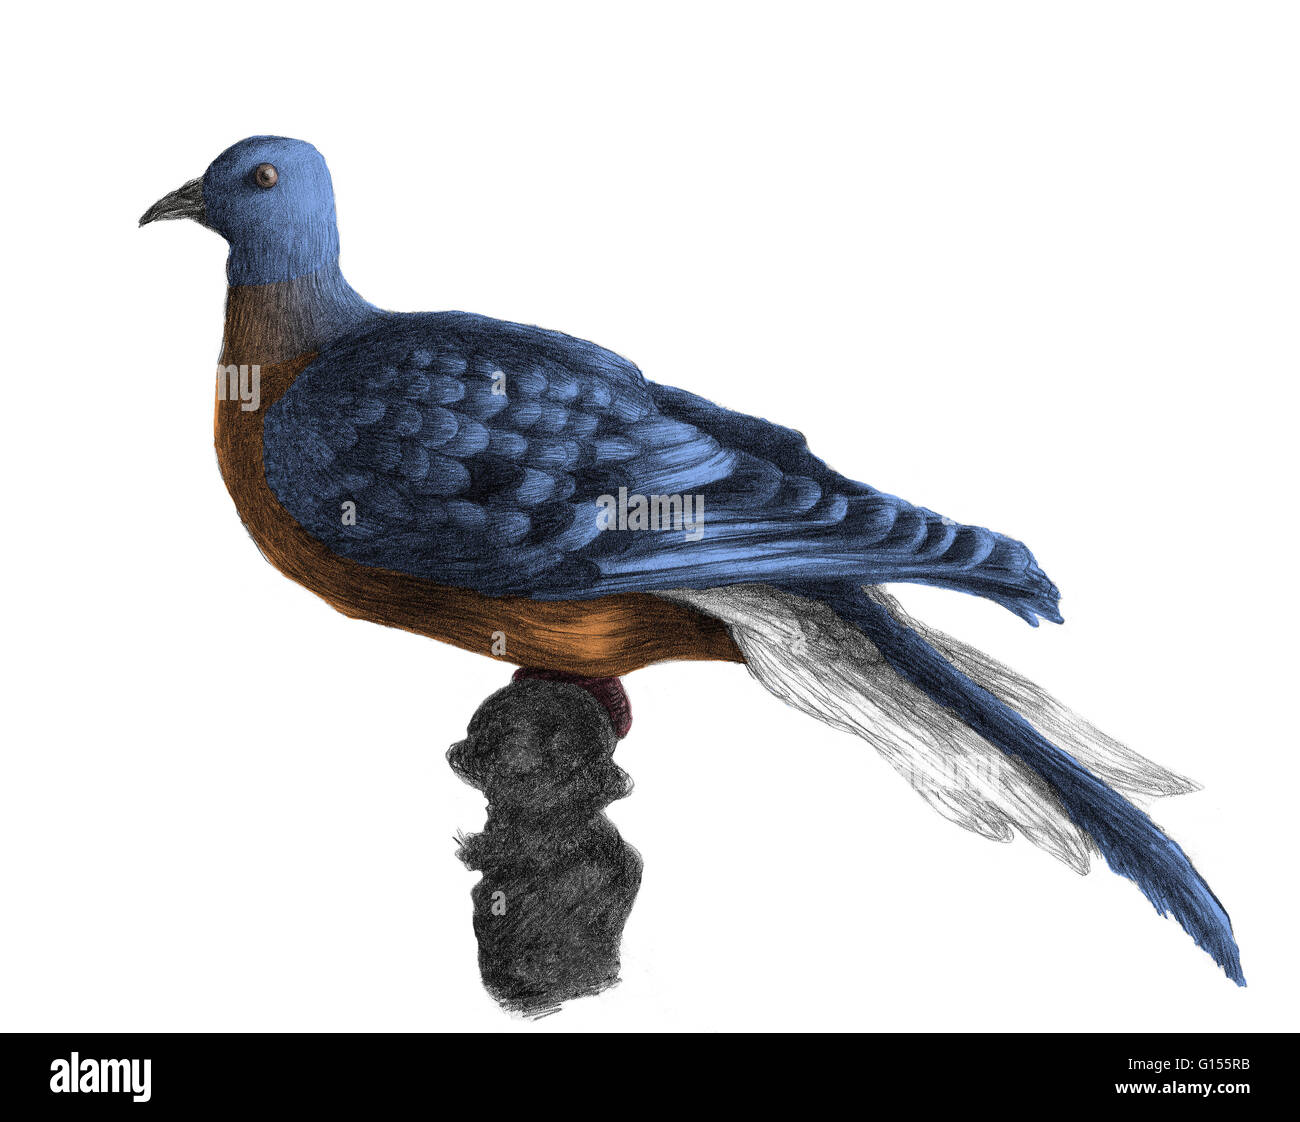 Illustration of the extinct Passenger Pigeon, Ectopistes migratorius, once the most abundant bird in North America. By the early 20th century it was extinct due to European encroachment on their territory and overhunting for use as cheap food for slaves. Stock Photo